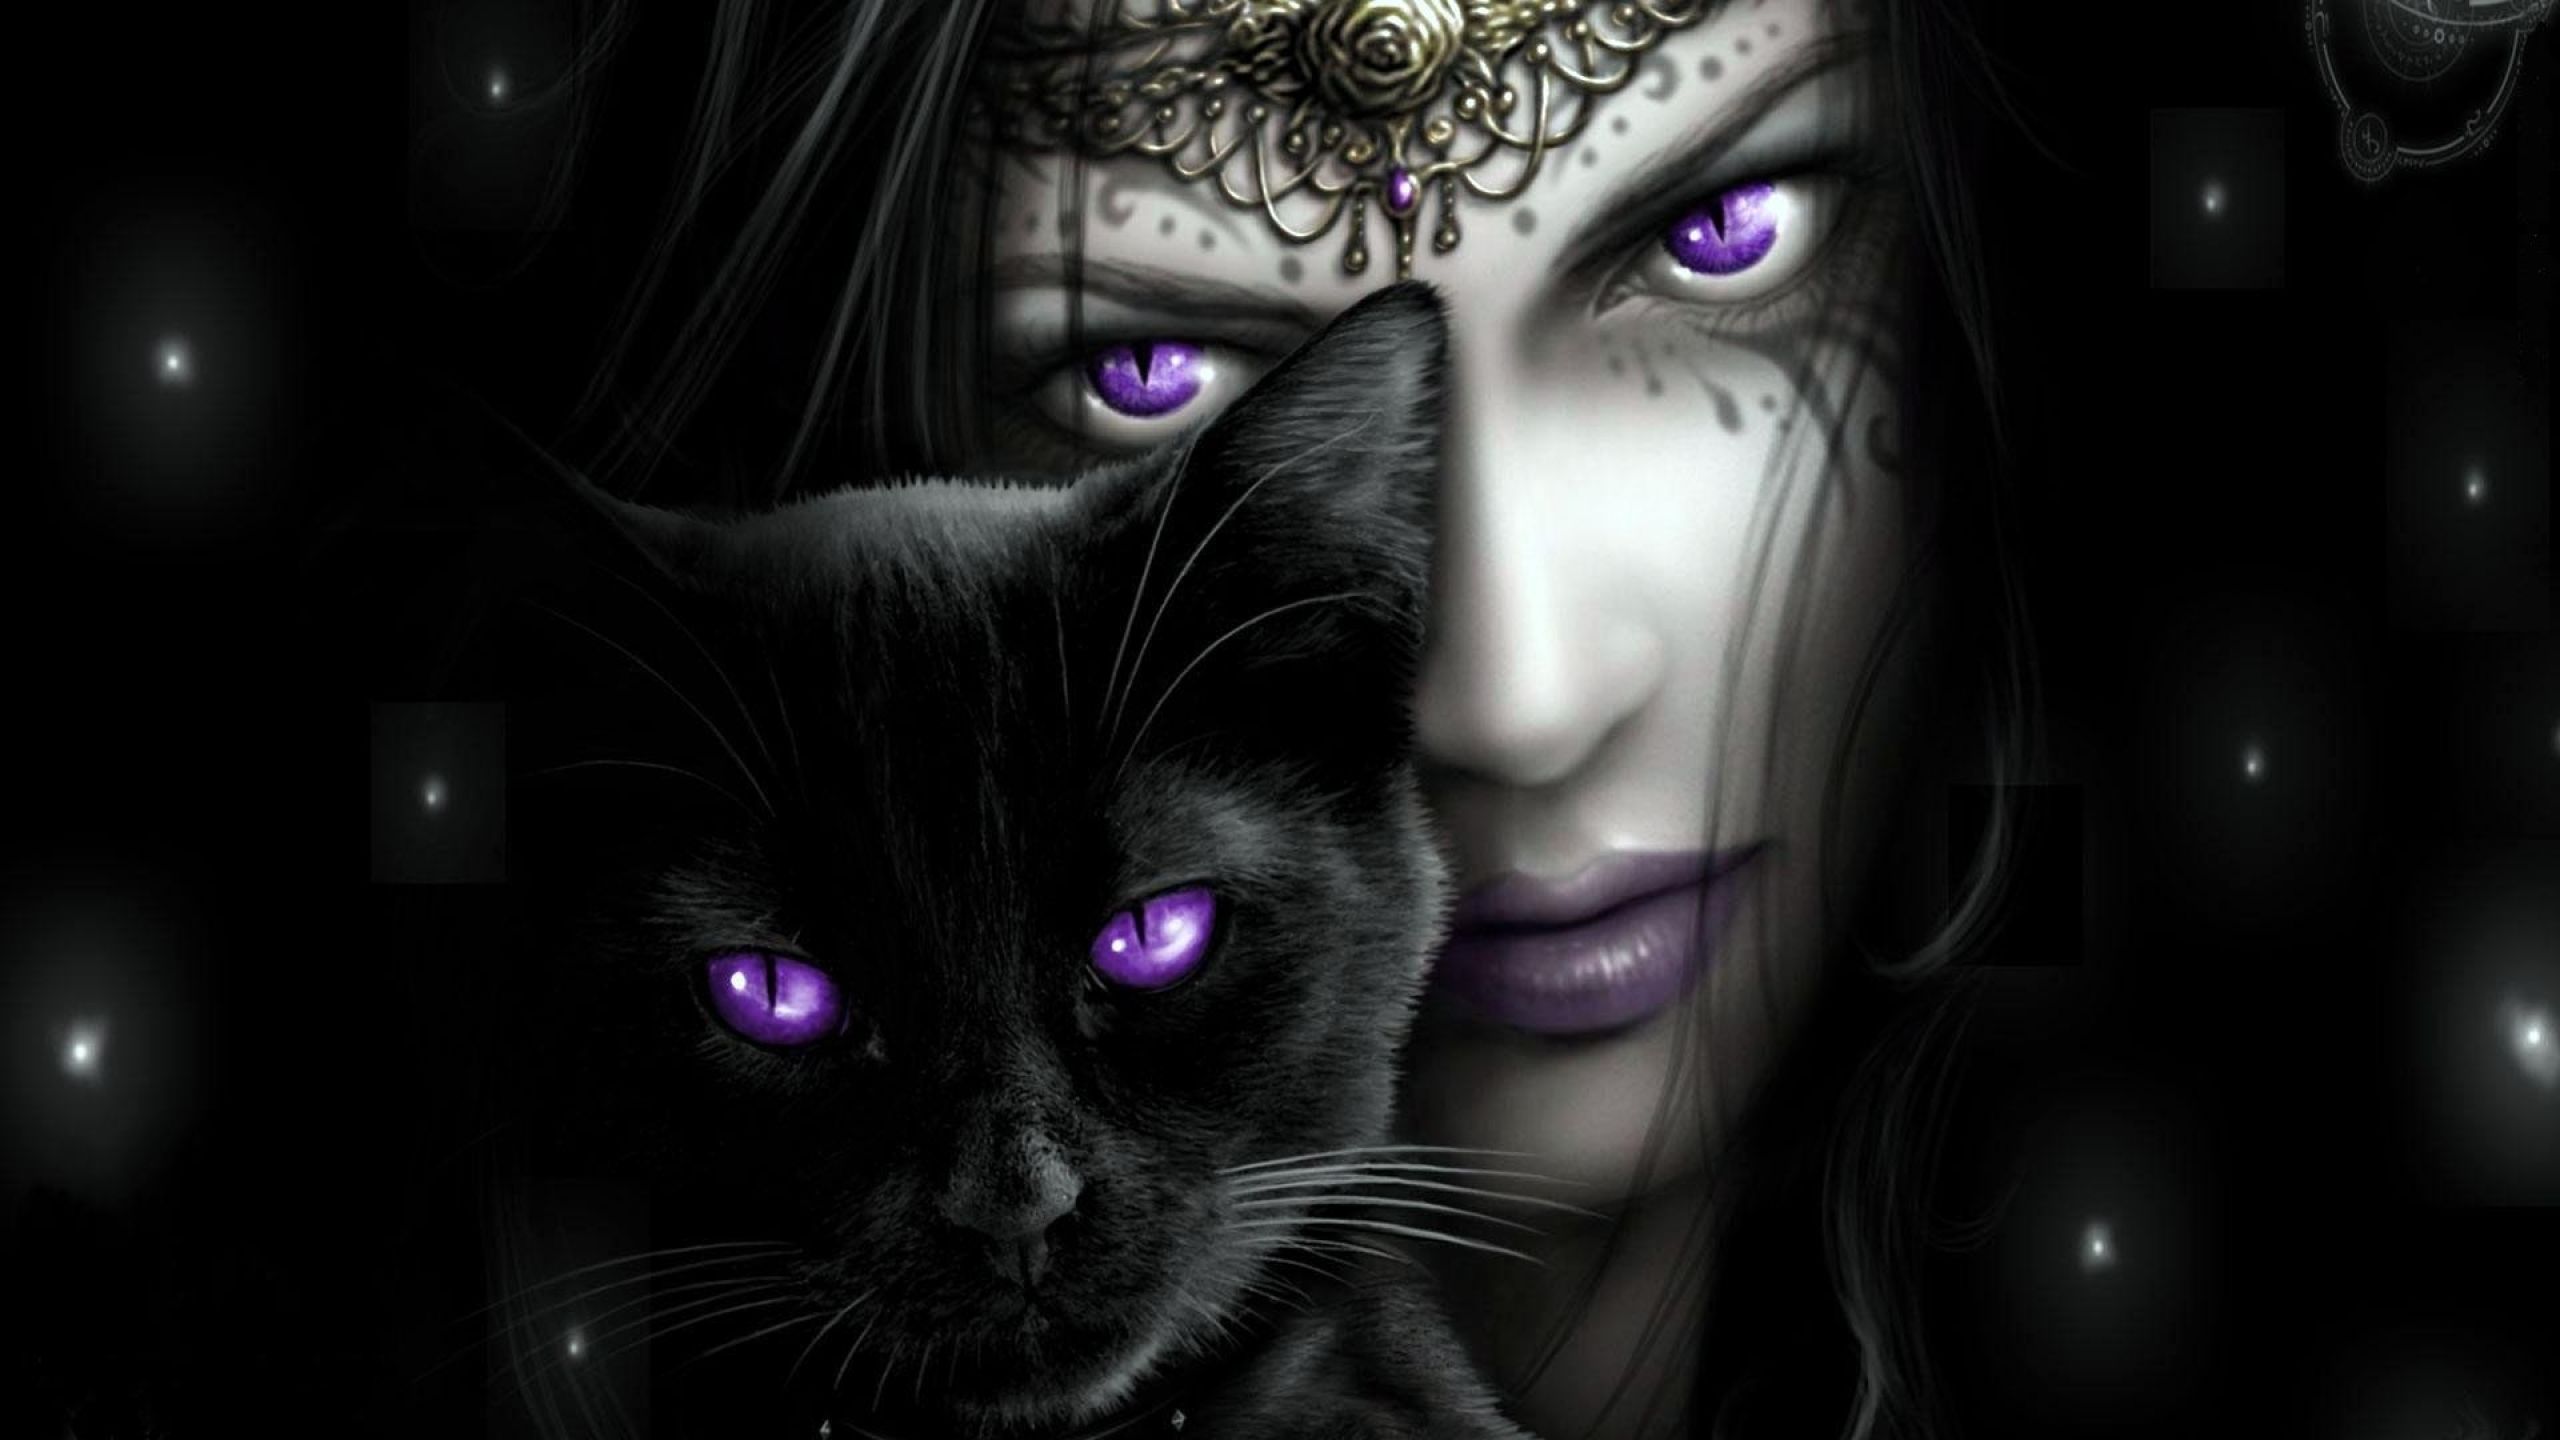 girl, cat, eyes 1440P Resolution Wallpaper, HD Fantasy 4K Wallpaper, Image, Photo and Background